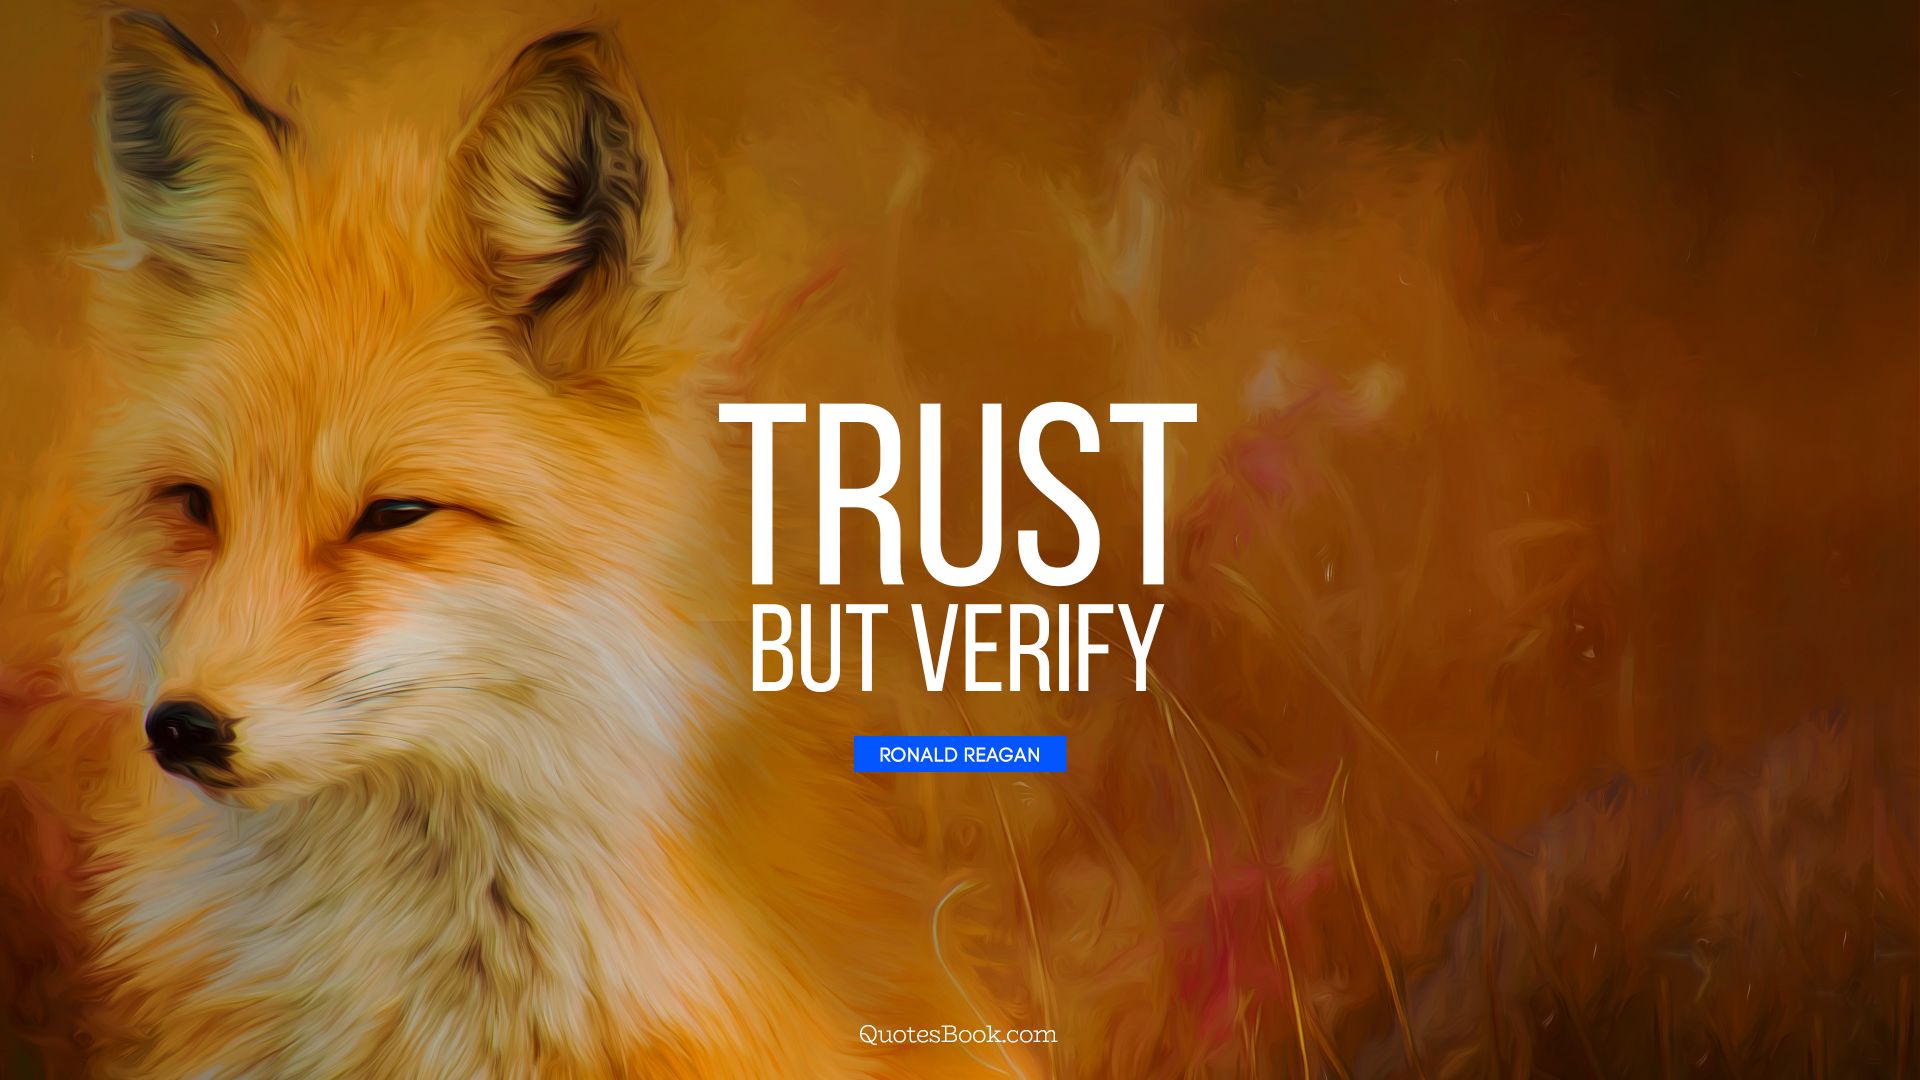 Trust, but verify. - Quote by Ronald Reagan